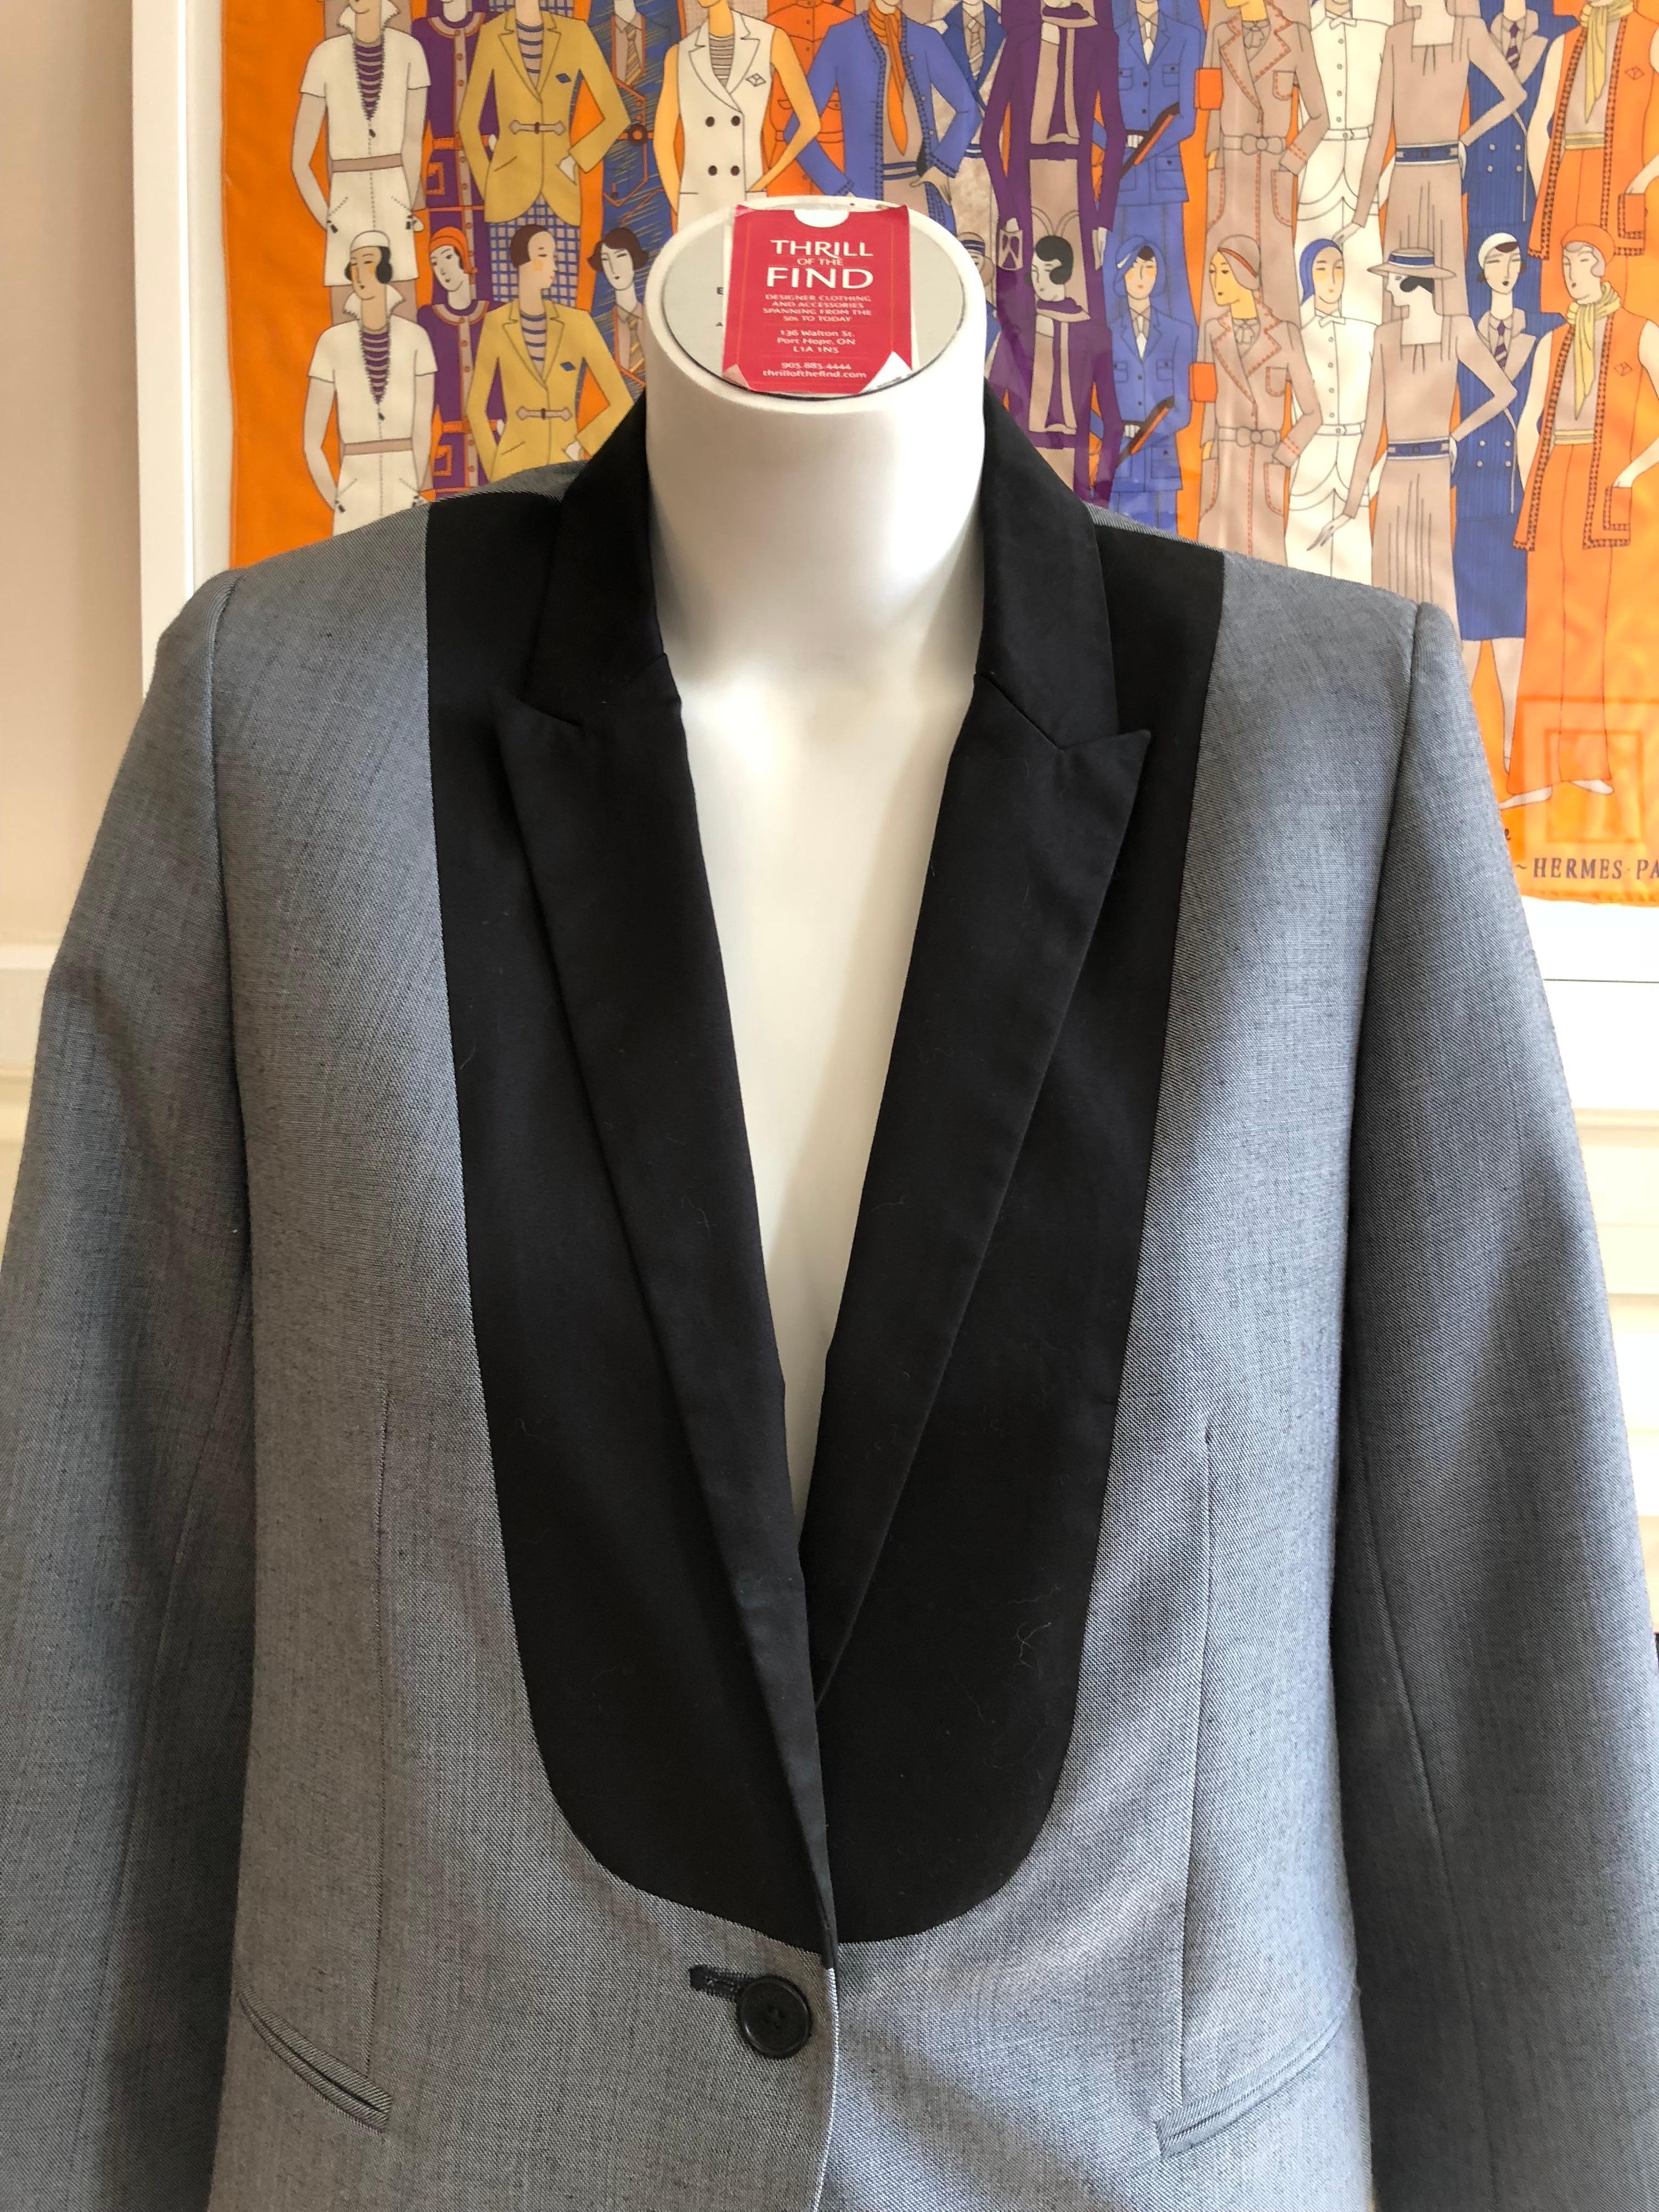 Grey with a black bib, the jacket is made of 55% polyester and 45% wool. It has a one button closure;  two fake slit pockets; five buttons on each cuff and two side vents at the back.

Wear it with a nice pair of jeans or pants/skirts.